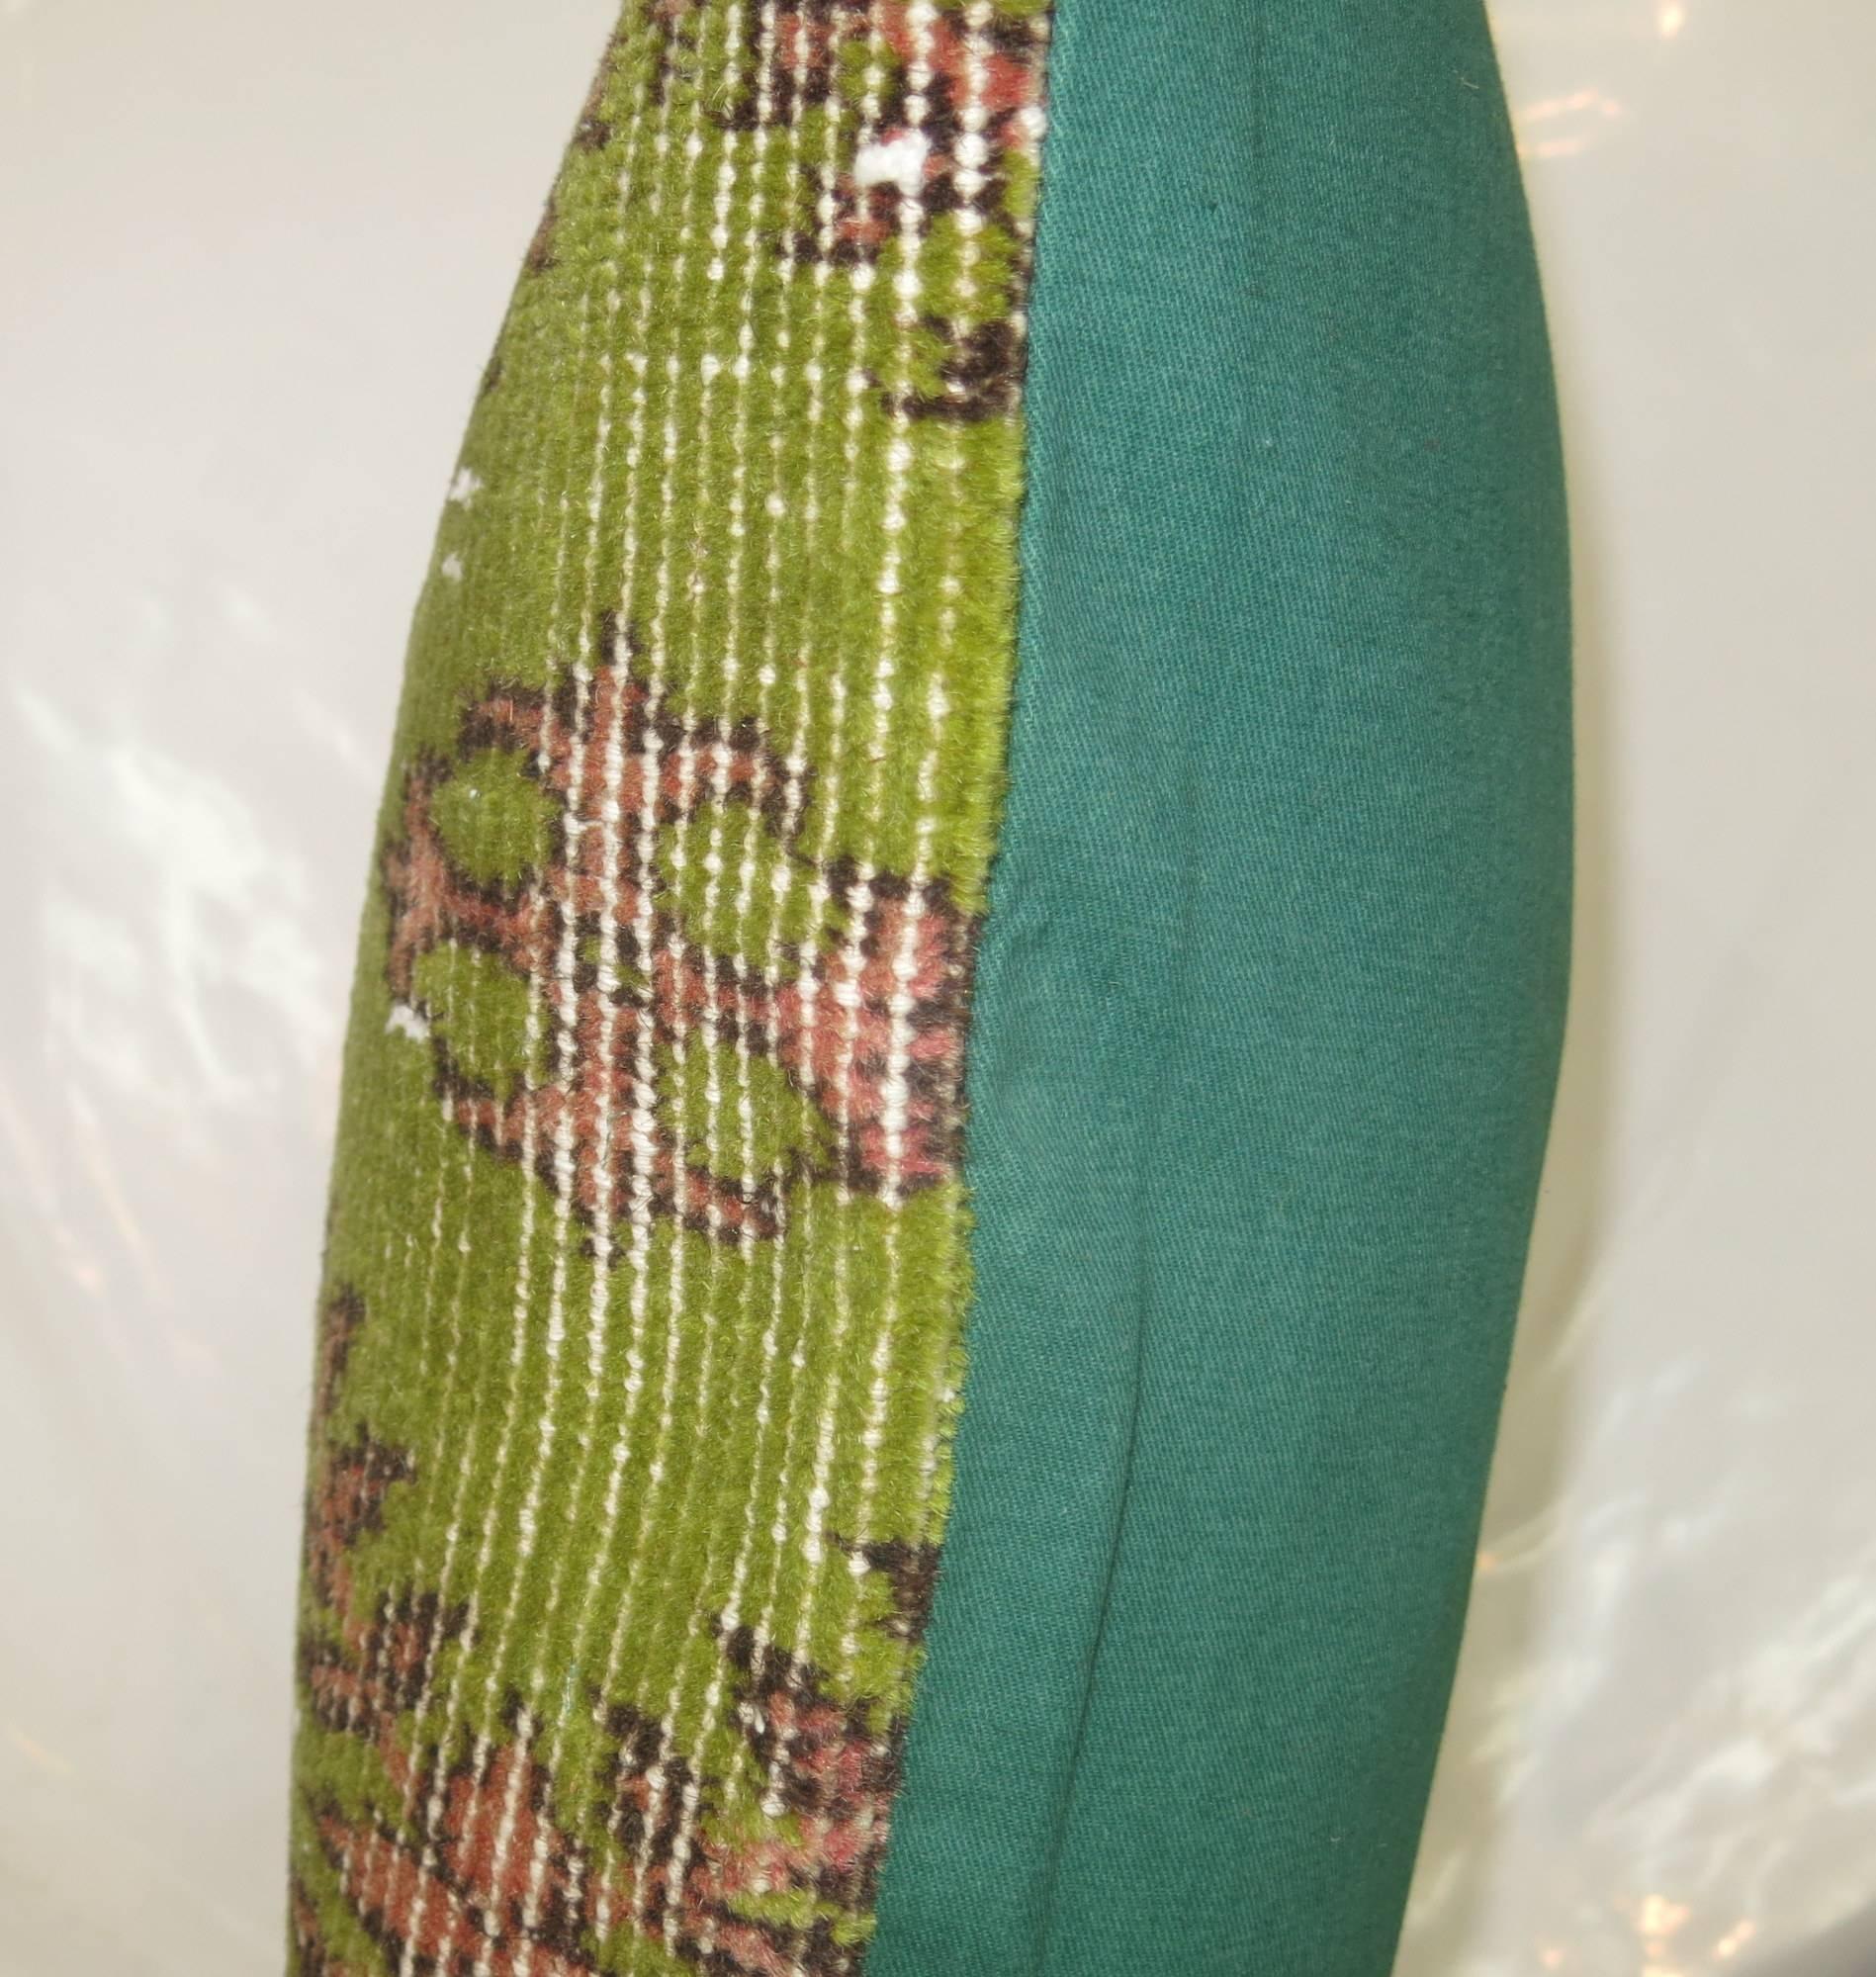 Pillow made from a vintage Turkish rug in pink and lime green. Zipper closure, Insert provided too

19'' x 19''